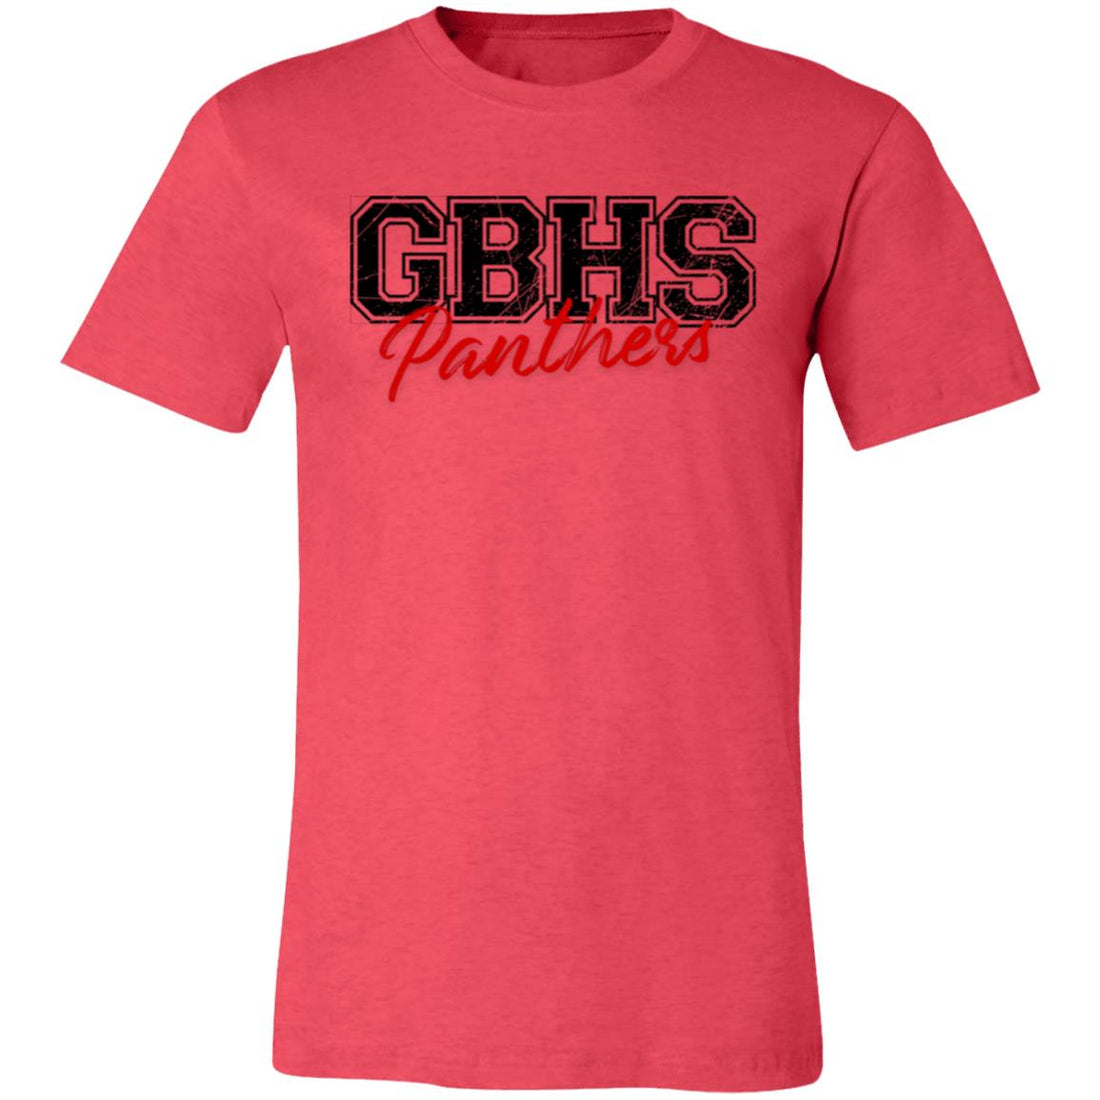 GBHS Panthers T-Shirt - T-Shirts - Positively Sassy - GBHS Panthers T-Shirt